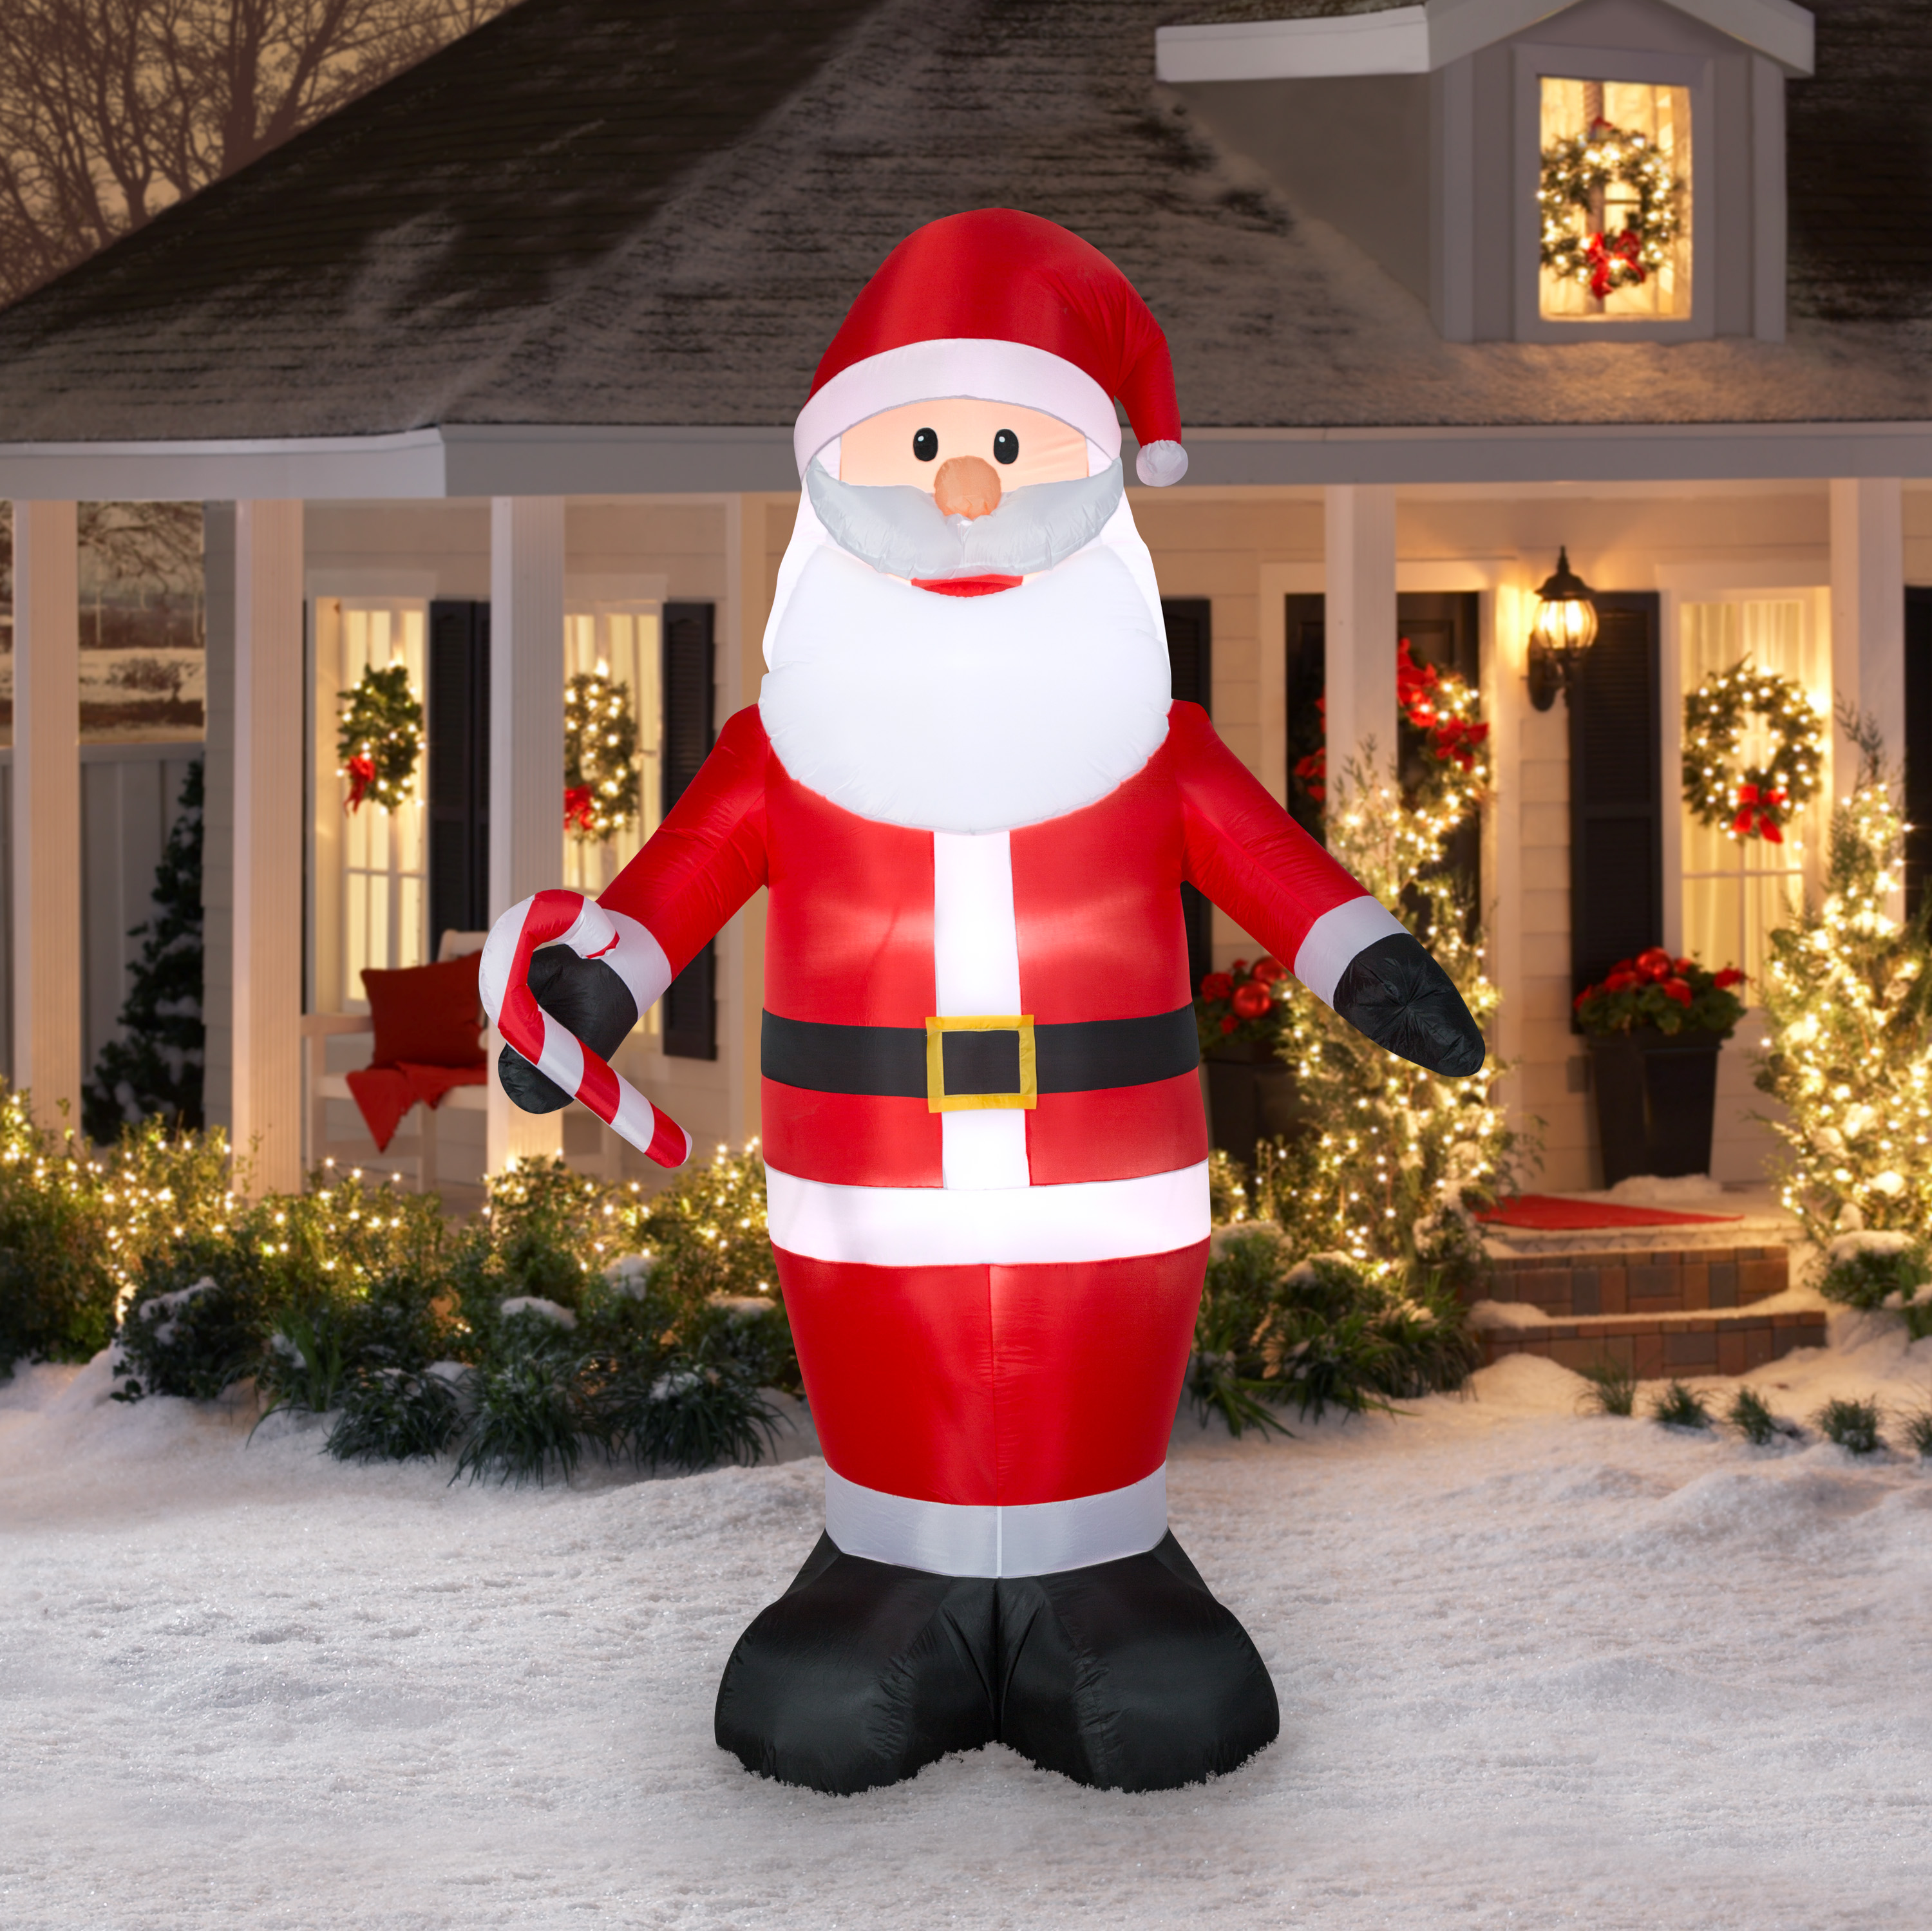 Airblown Inflatables 9 Ft. Jumbo Santa Inflatable - image 2 of 4